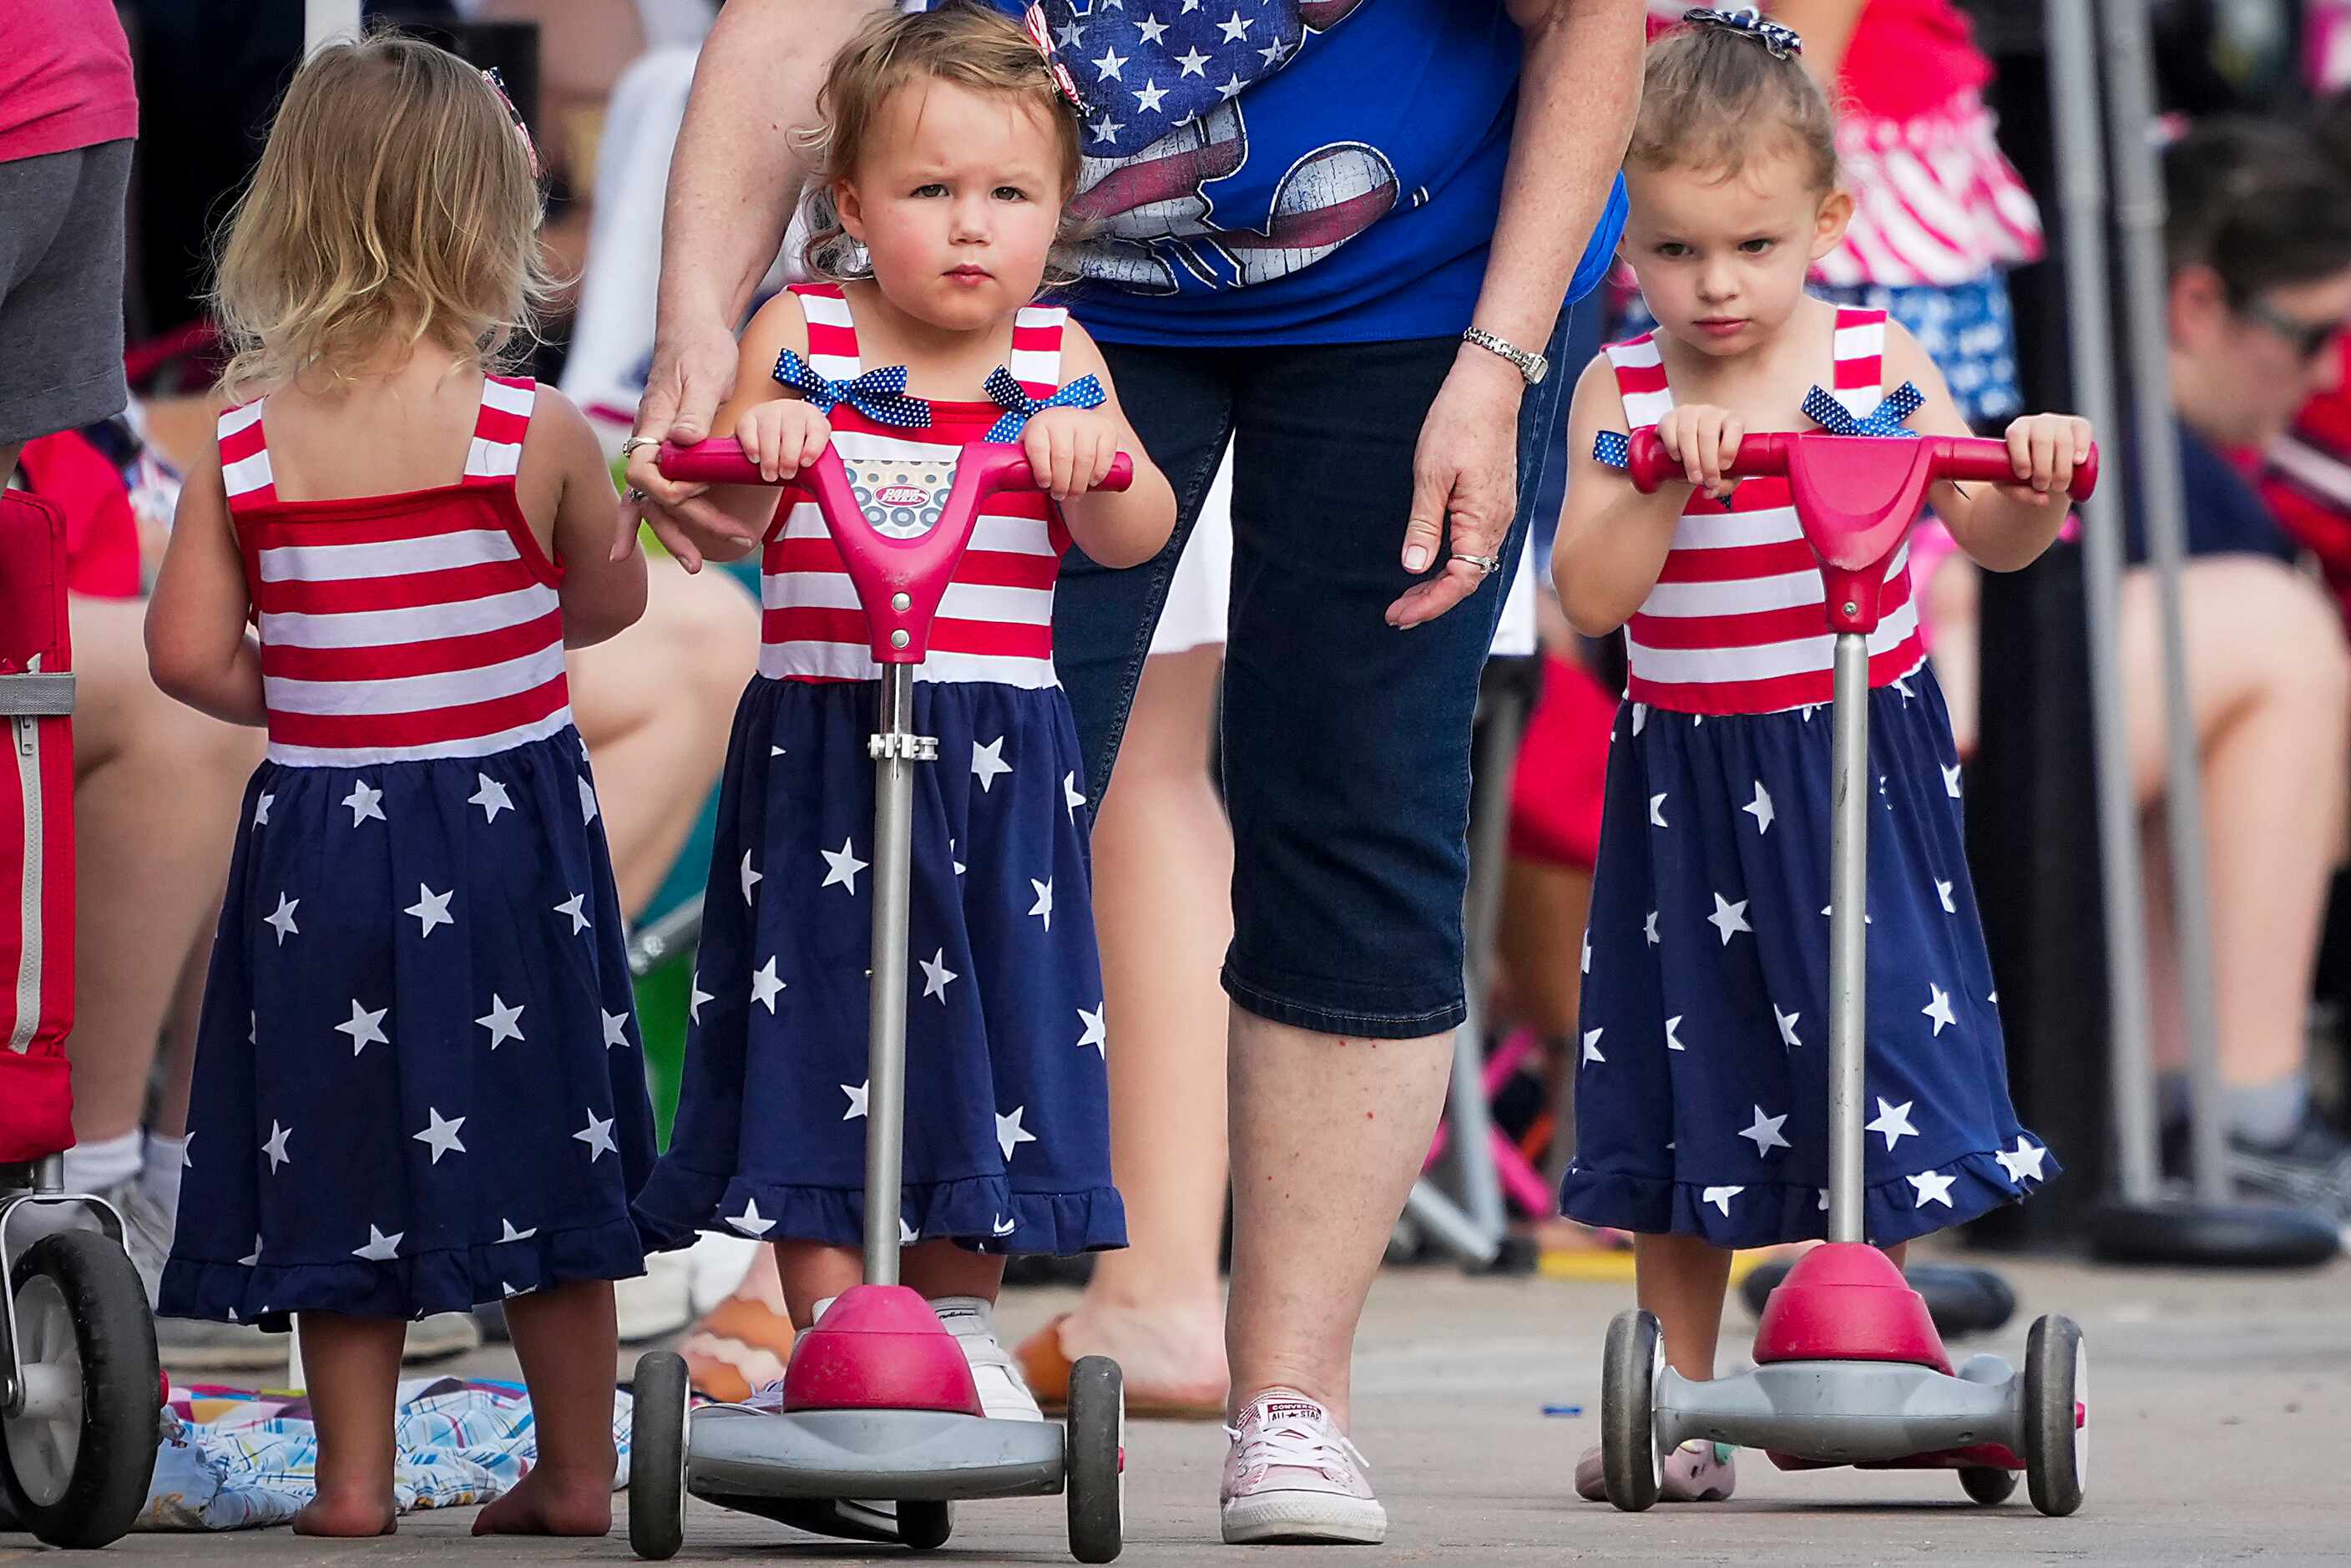 Brooklyn Kelsey, 2, (center) gets help riding a scooter from her grandmother as she plays...